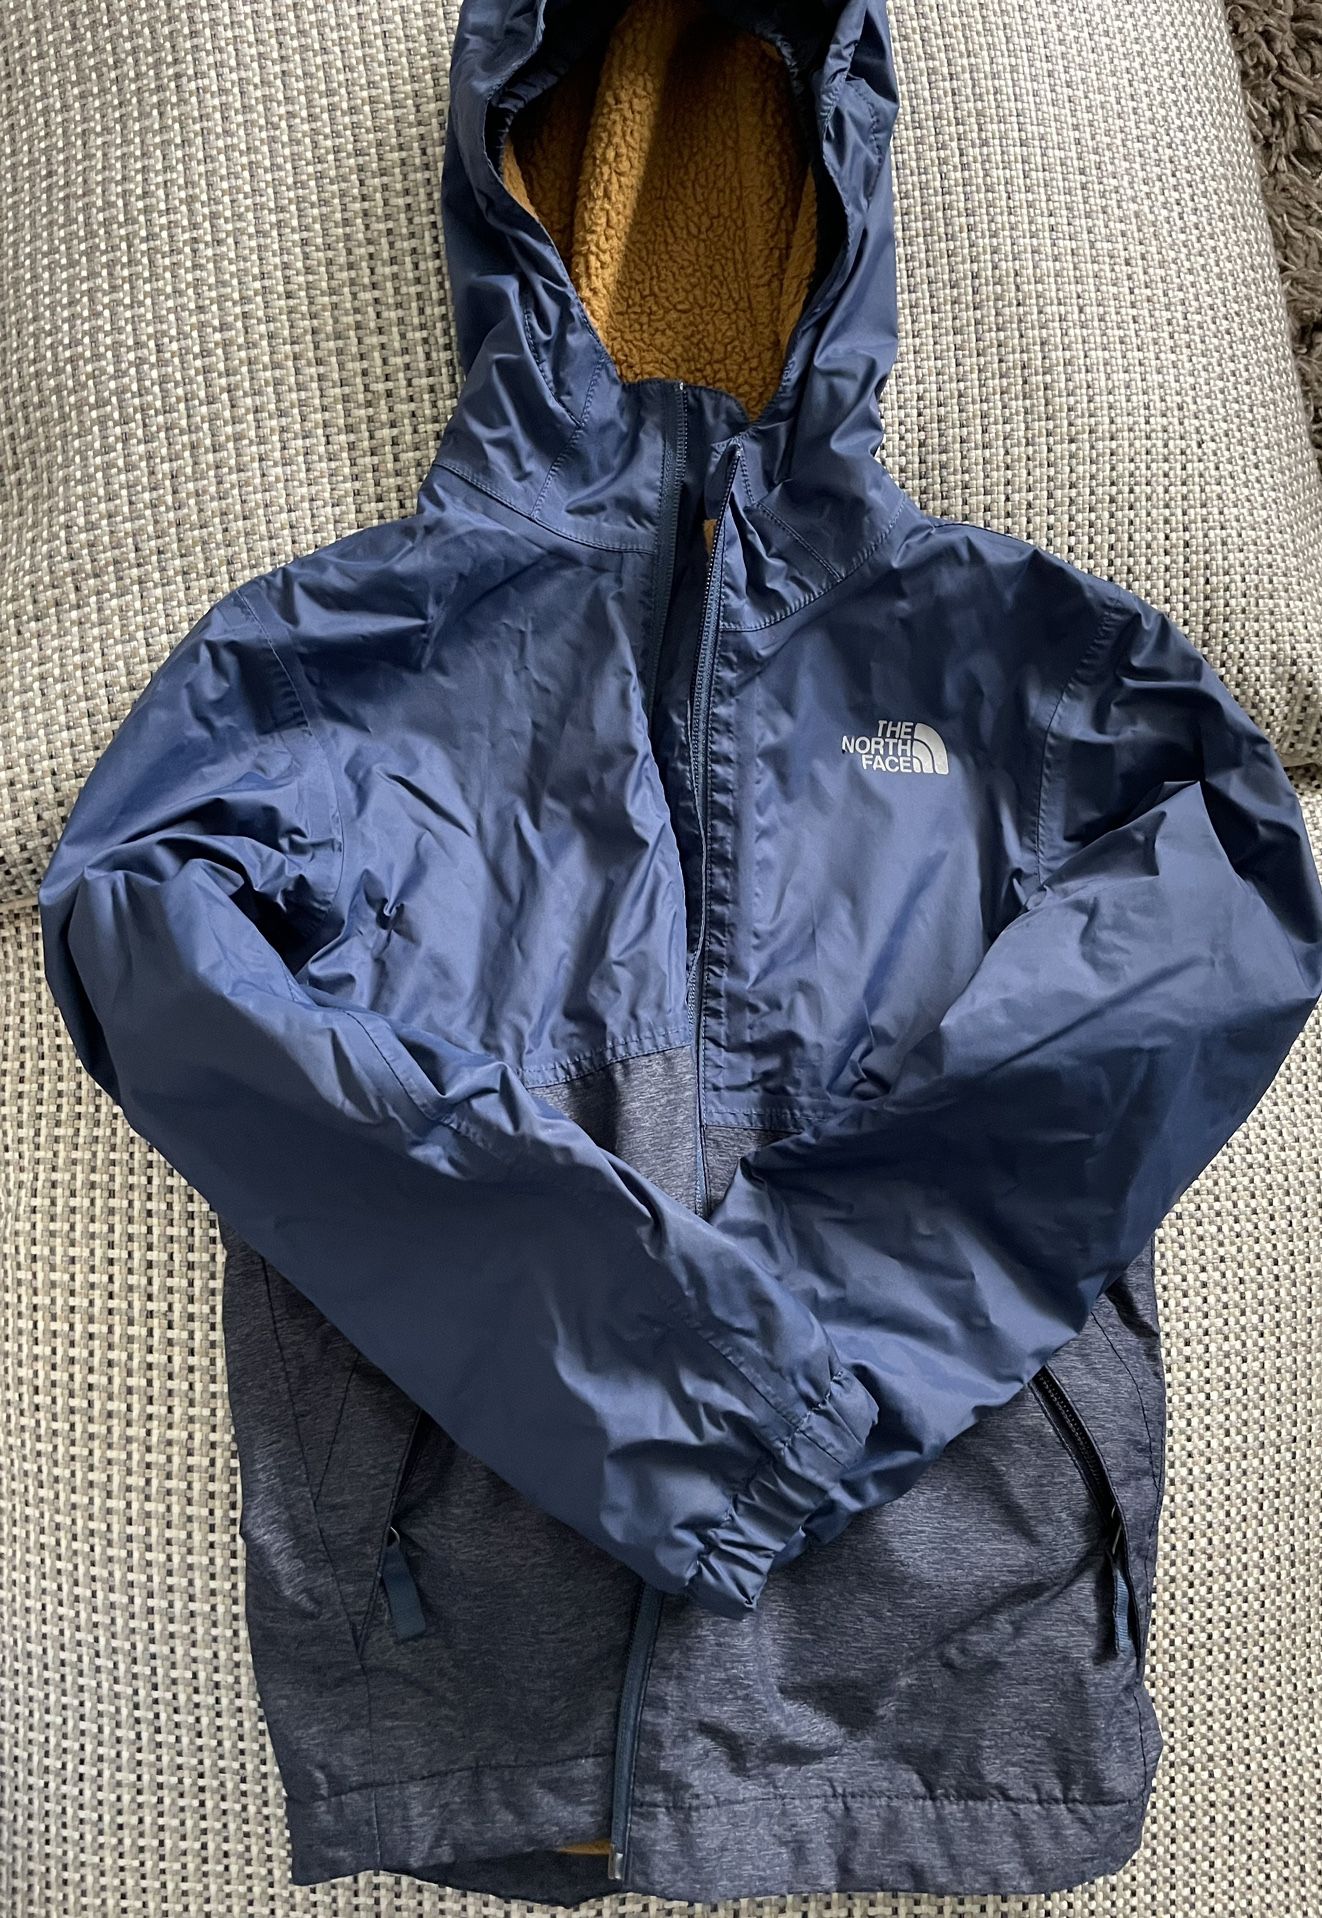 Jacket (The North Face And Gap)